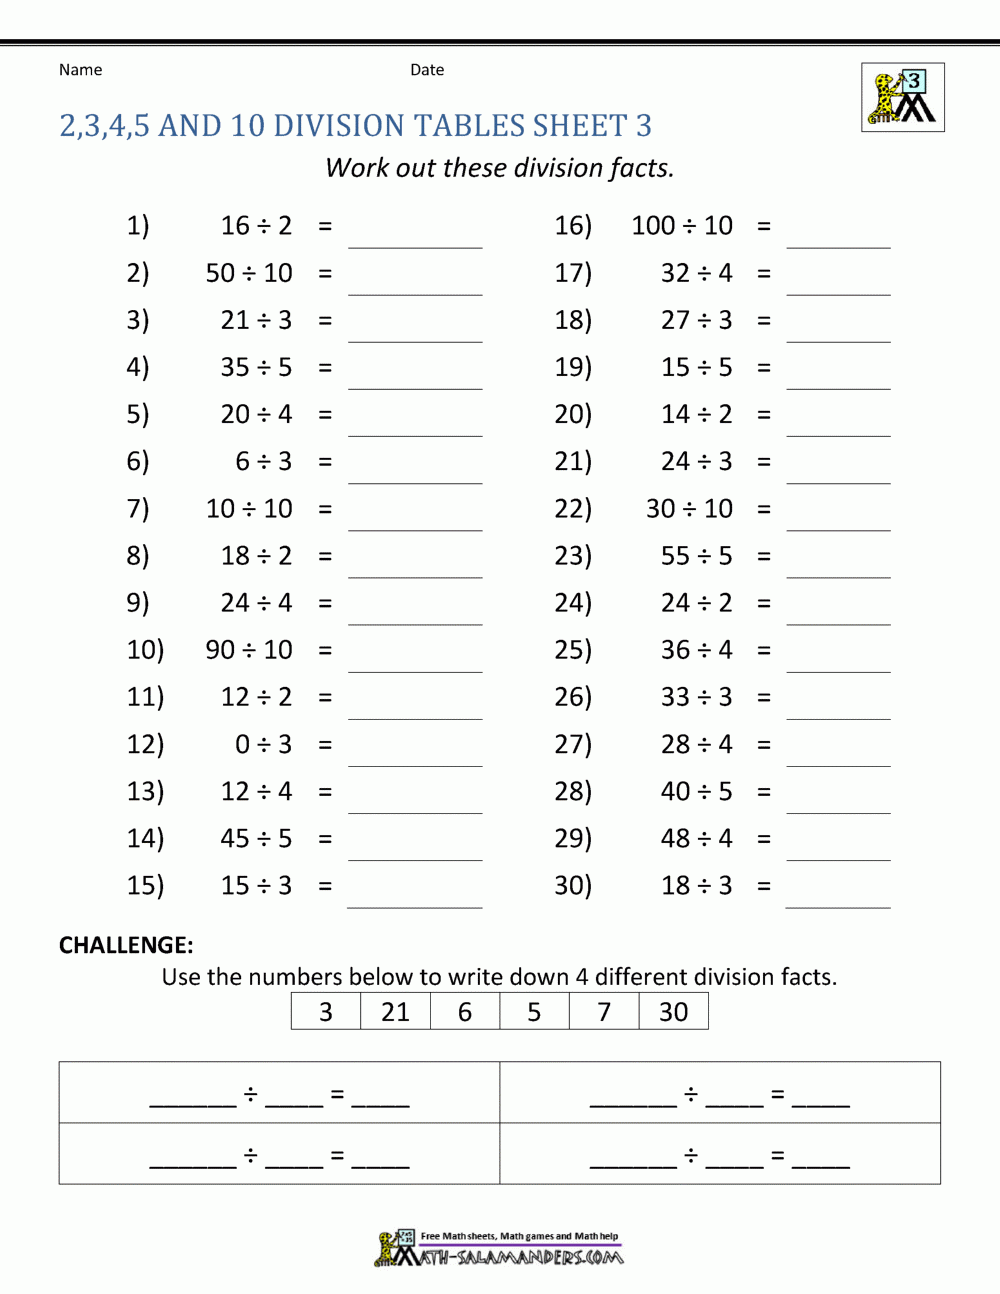 Multiplication And Division Facts Worksheets Pdf